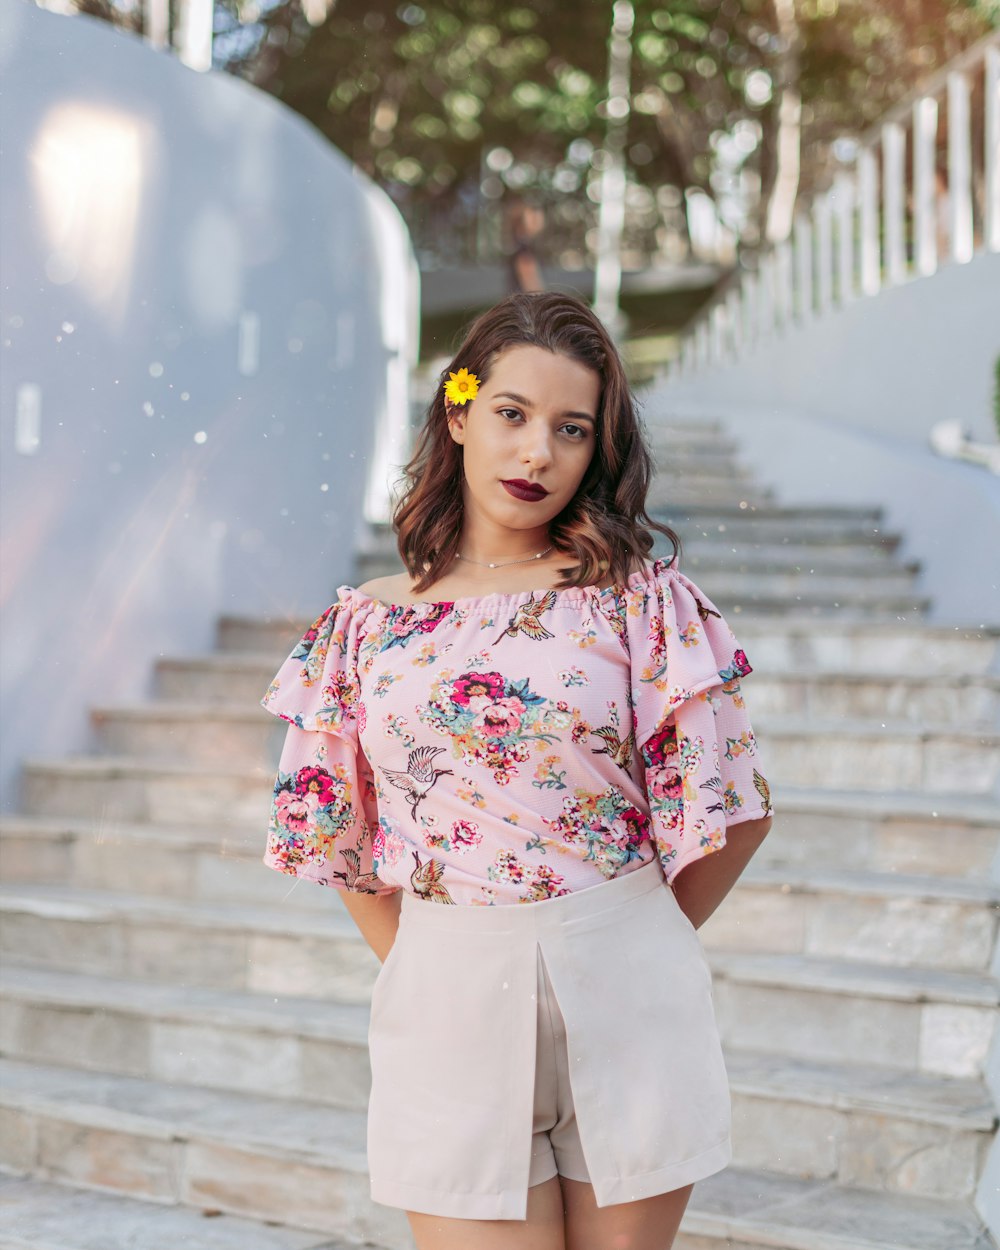 woman in pink and white floral shirt and white pants standing on concrete stairs